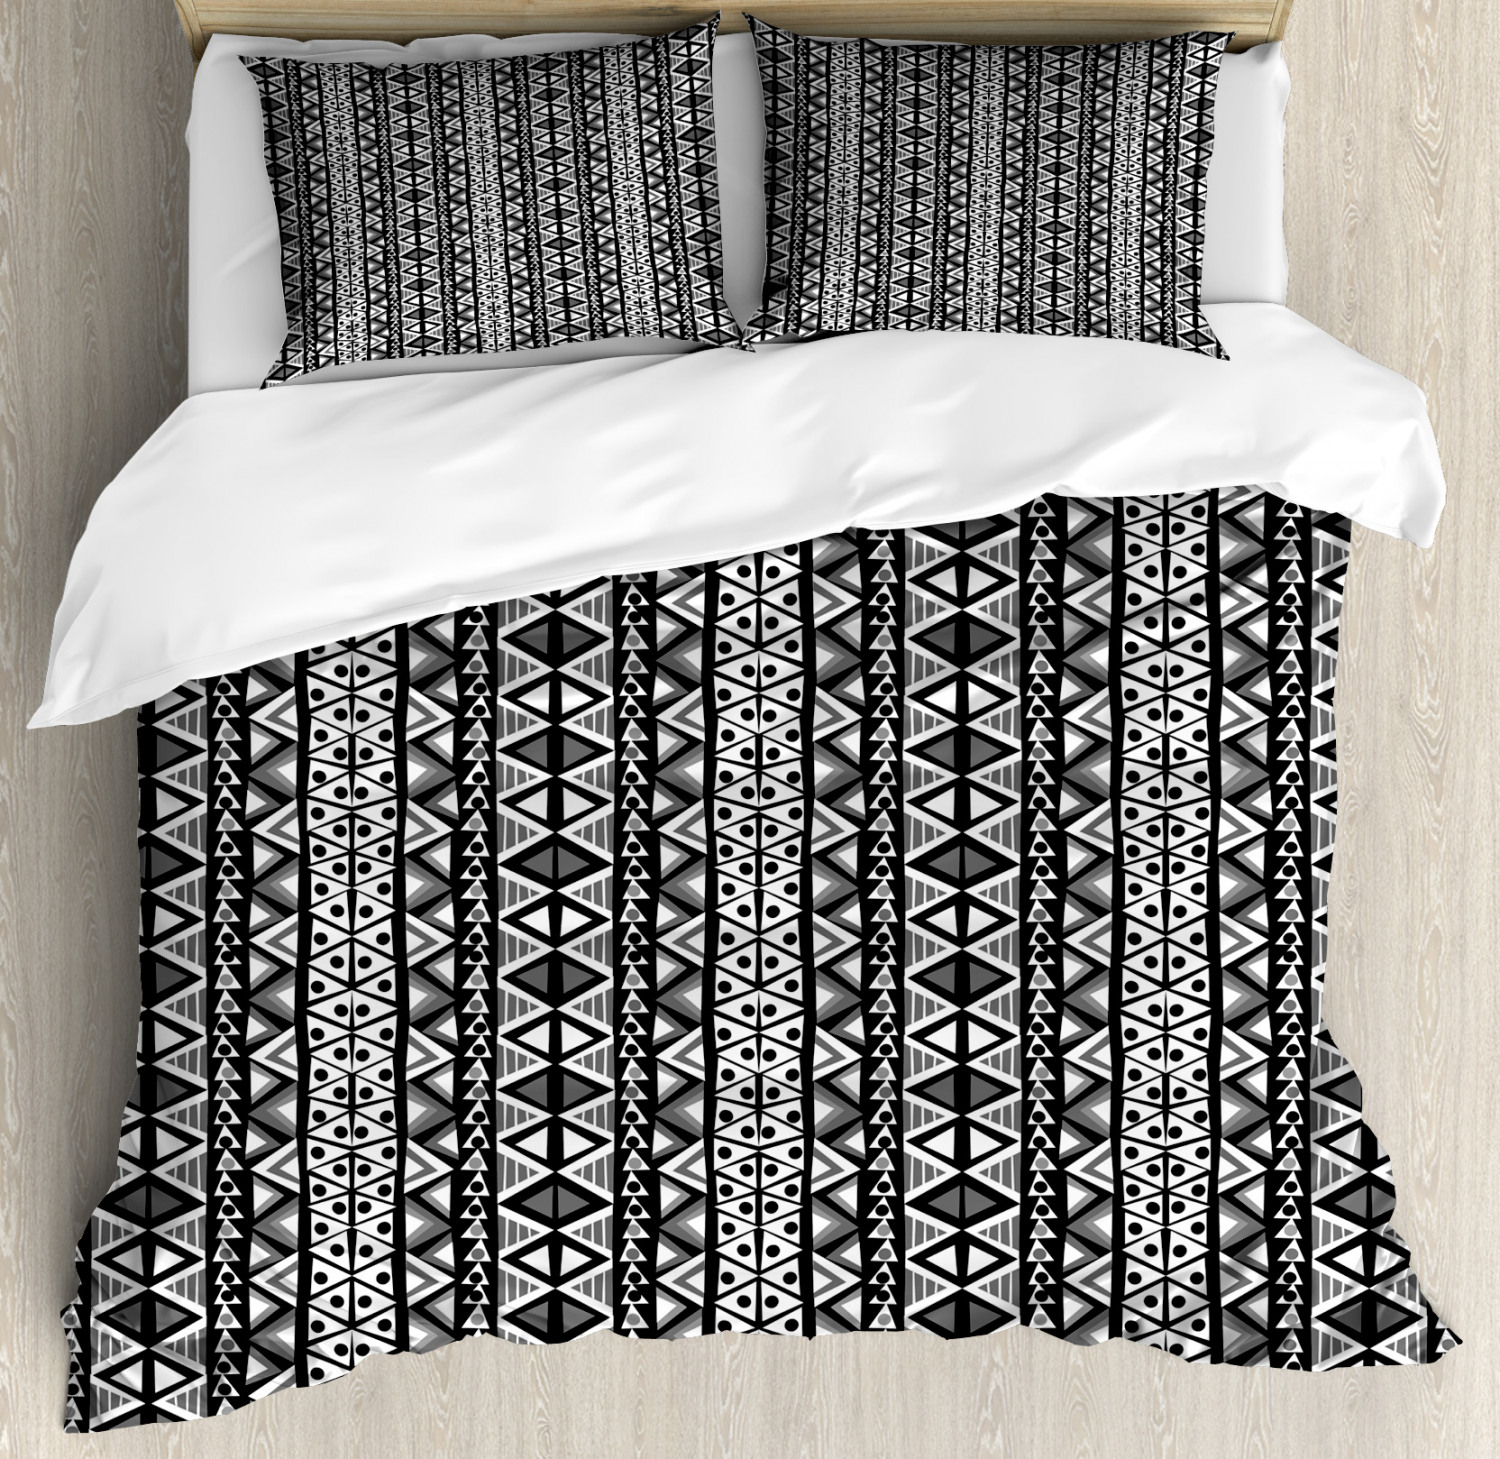 Western Duvet Cover Set With Pillow, Western Duvet Covers King